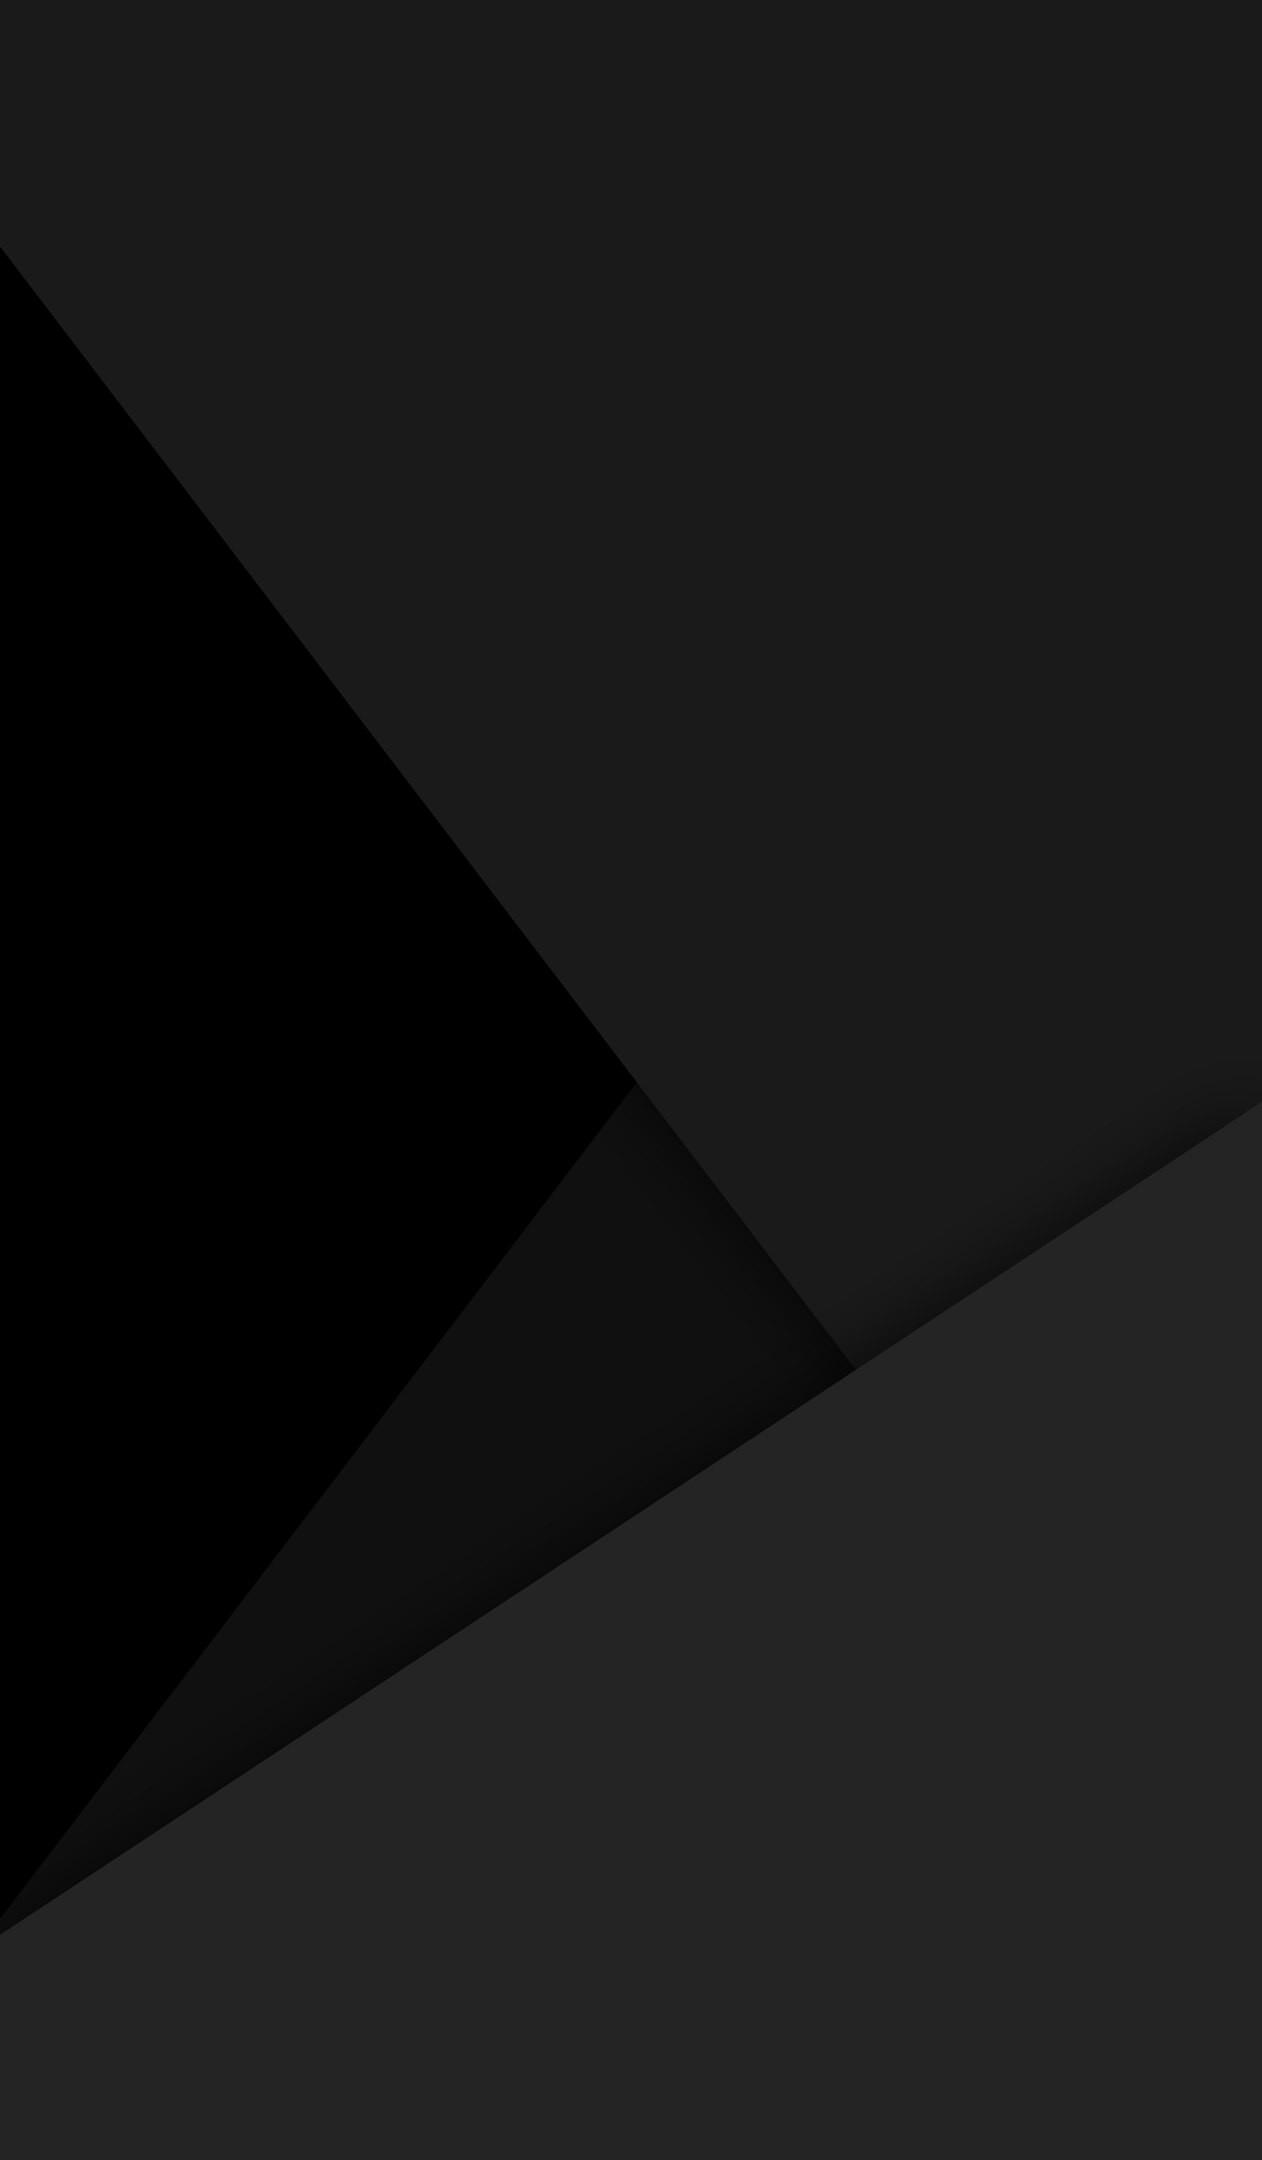 Amoled Solid Black Wallpapers - Wallpaper Cave